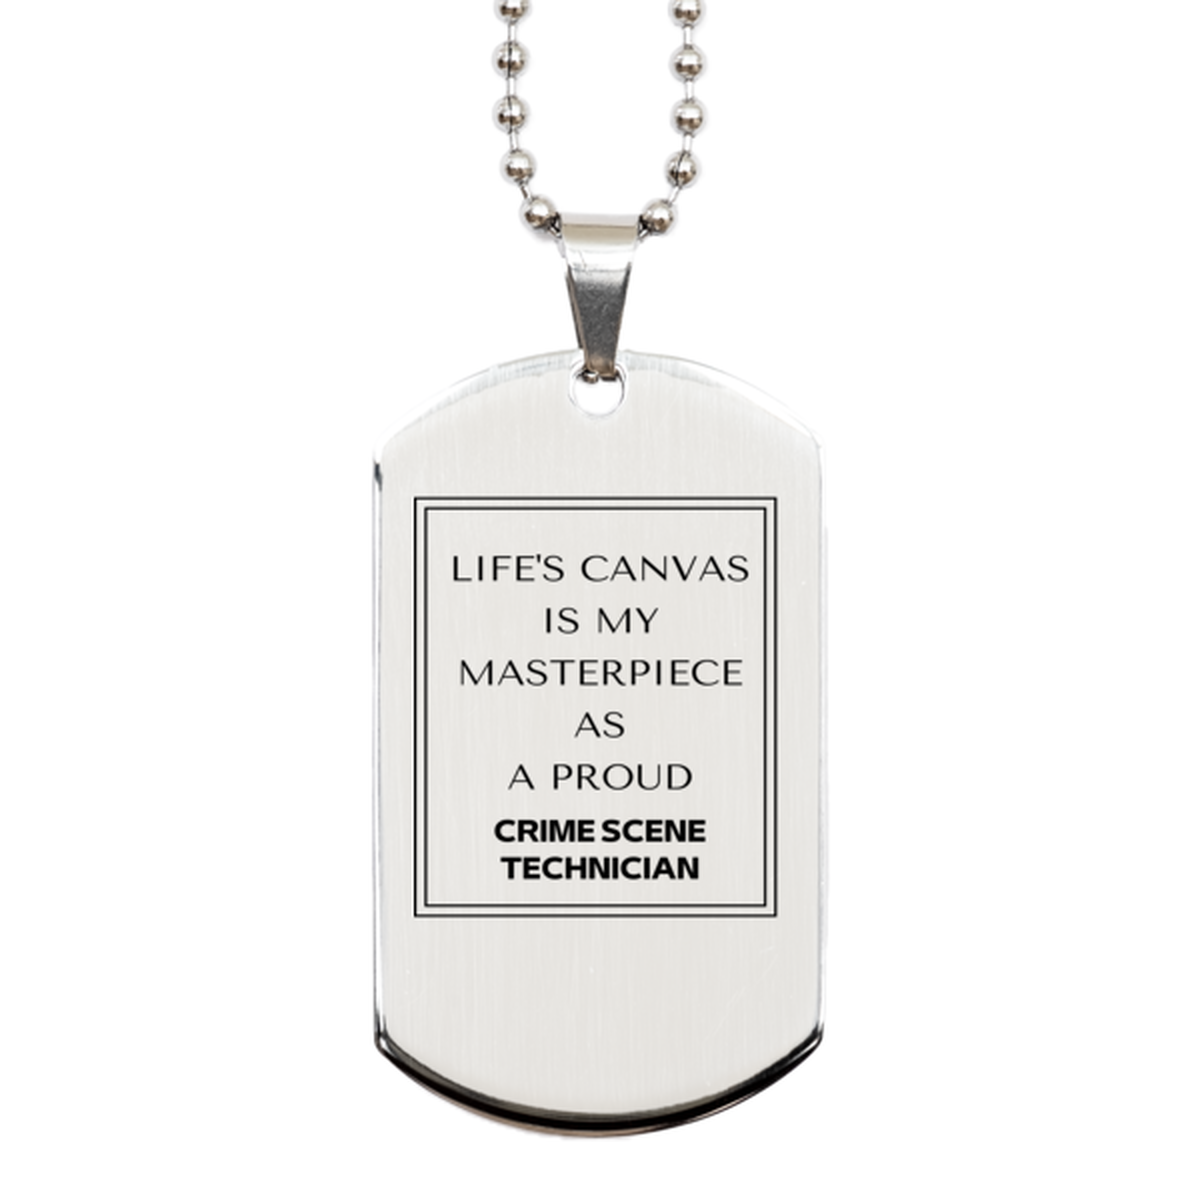 Proud Crime Scene Technician Gifts, Life's canvas is my masterpiece, Epic Birthday Christmas Unique Silver Dog Tag For Crime Scene Technician, Coworkers, Men, Women, Friends